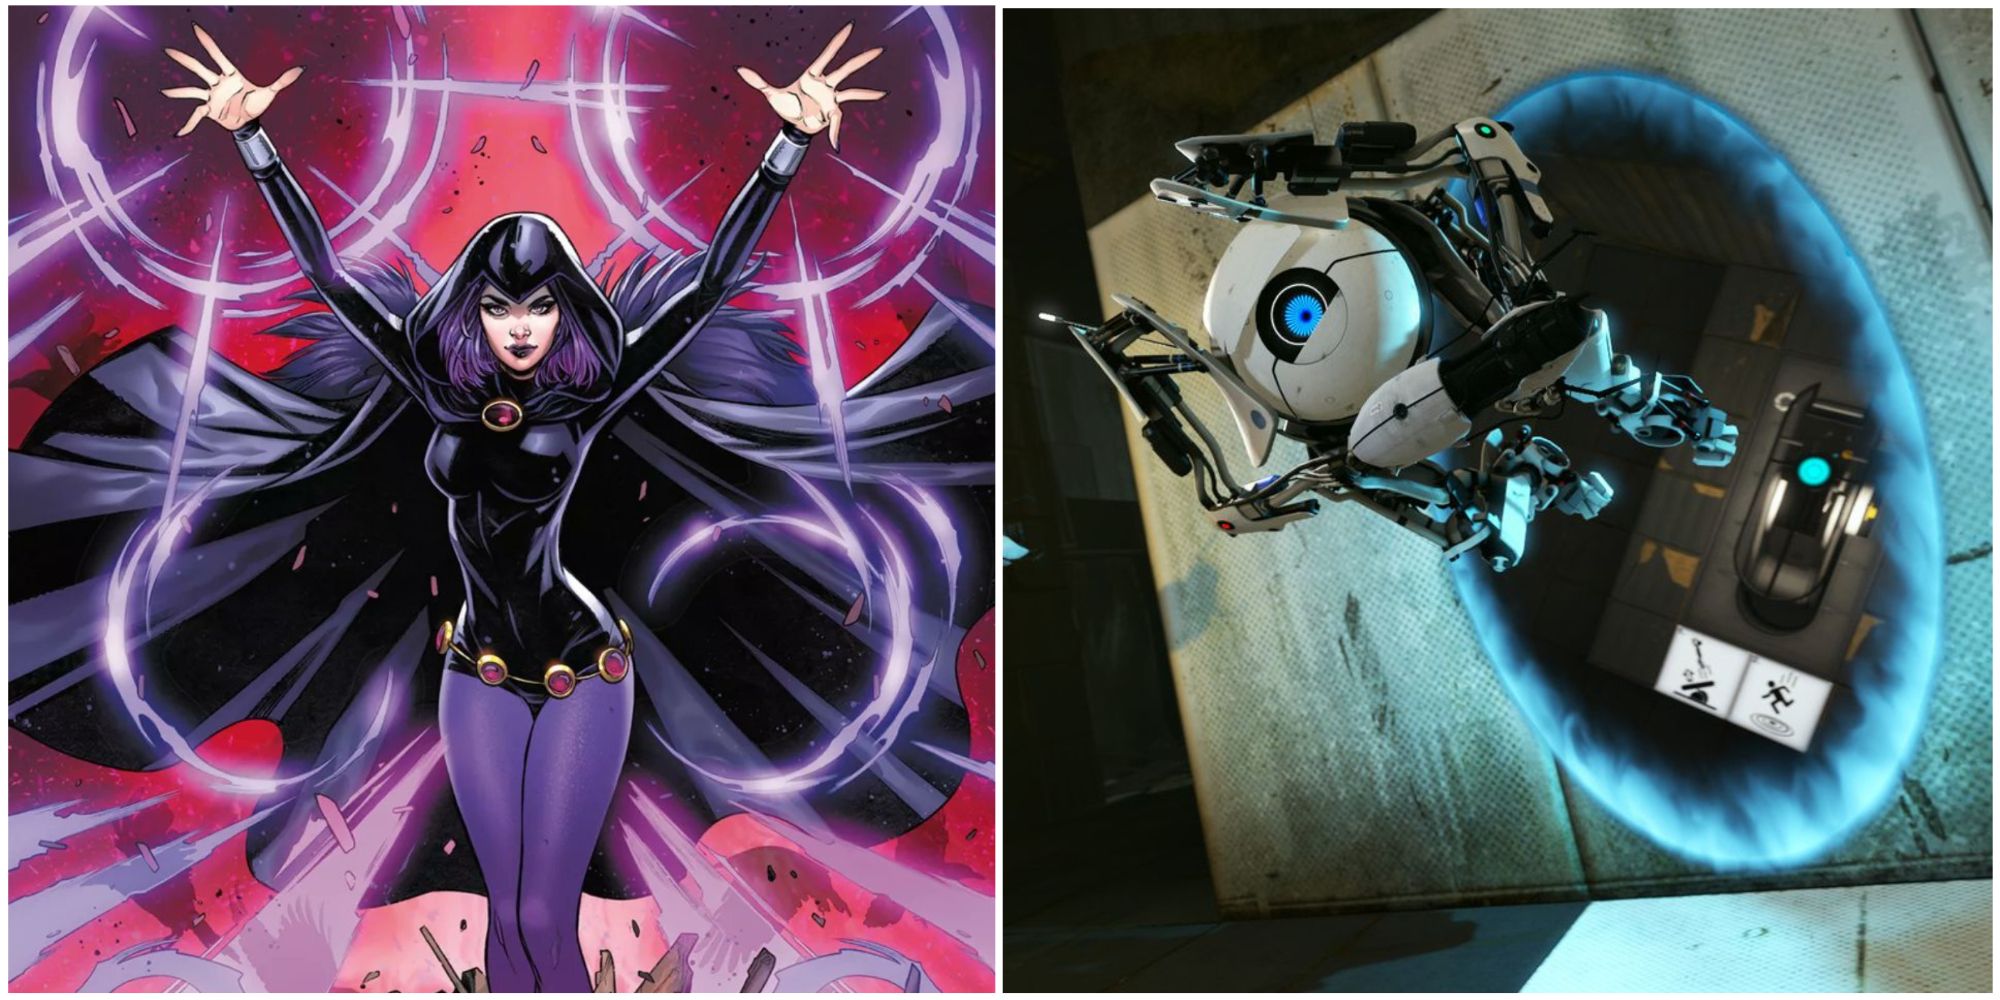 Raven in DC Comics and Portal